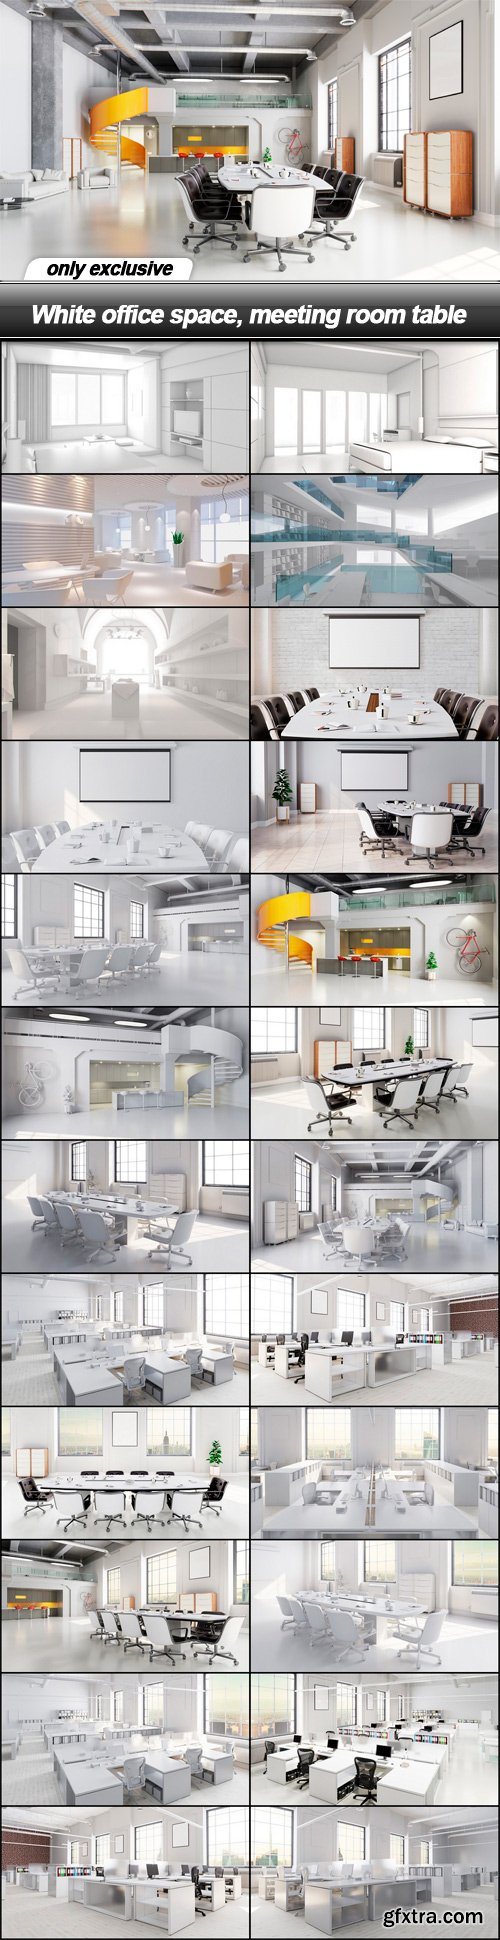 White office space, meeting room table - 25 UHQ JPEG